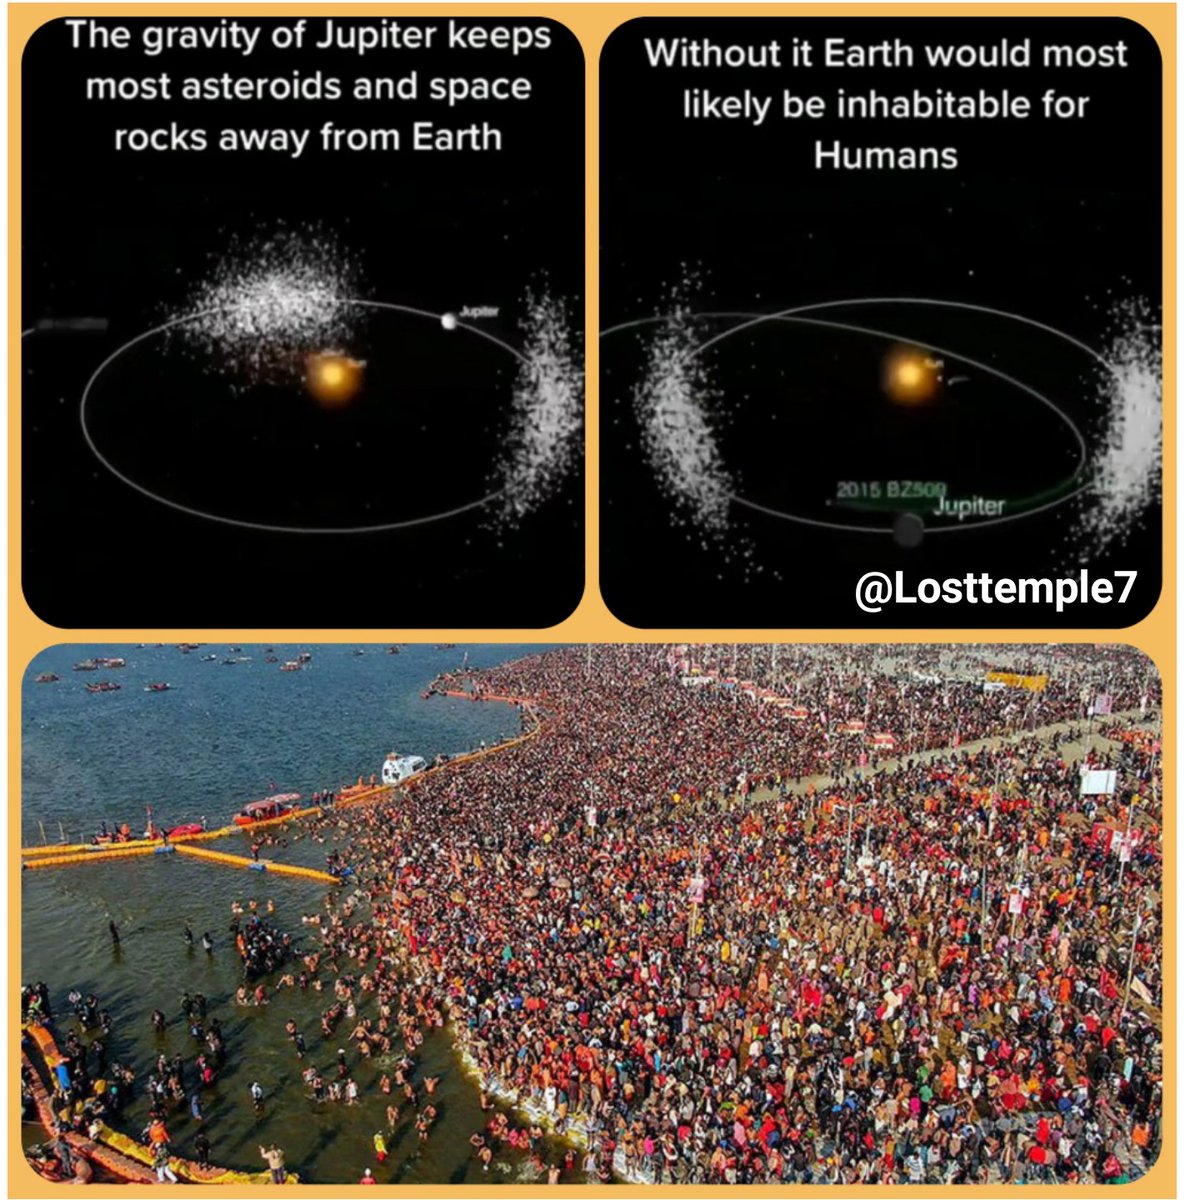 Since 1000s of years, we celebrated Mahakumbh at Prayag every 12 yrs based on Brahaspati (Jupiter) cycle. We worshipped it as Guru. Now they came to know that Jupiter completes one cycle around Sun in 12 yrs, it protects Earth. & then 'They' tell us about 'their' science !!